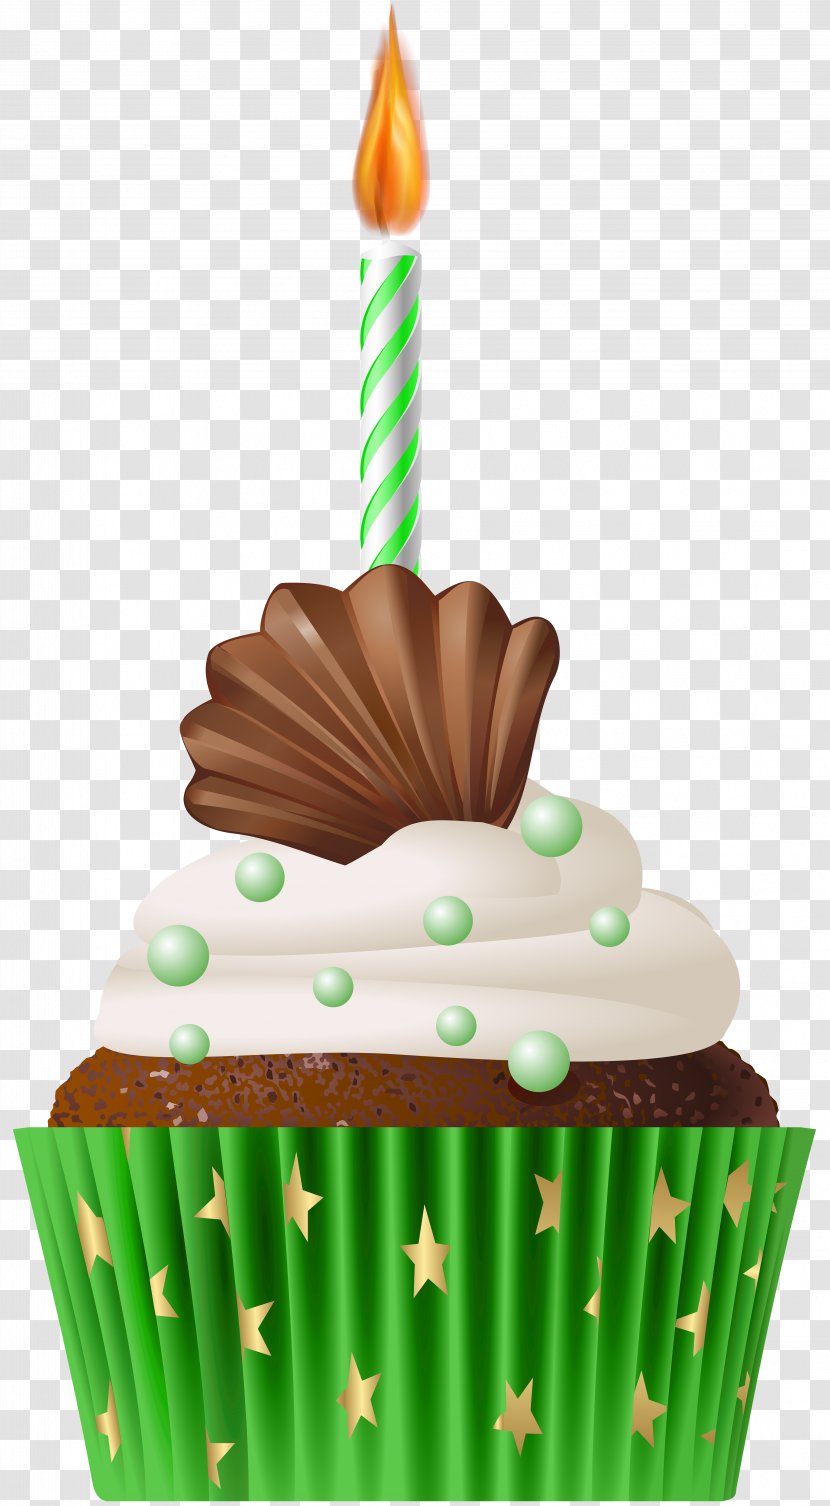 Birthday Cake Candle Clip Art - Muffin - Green With Transparent PNG